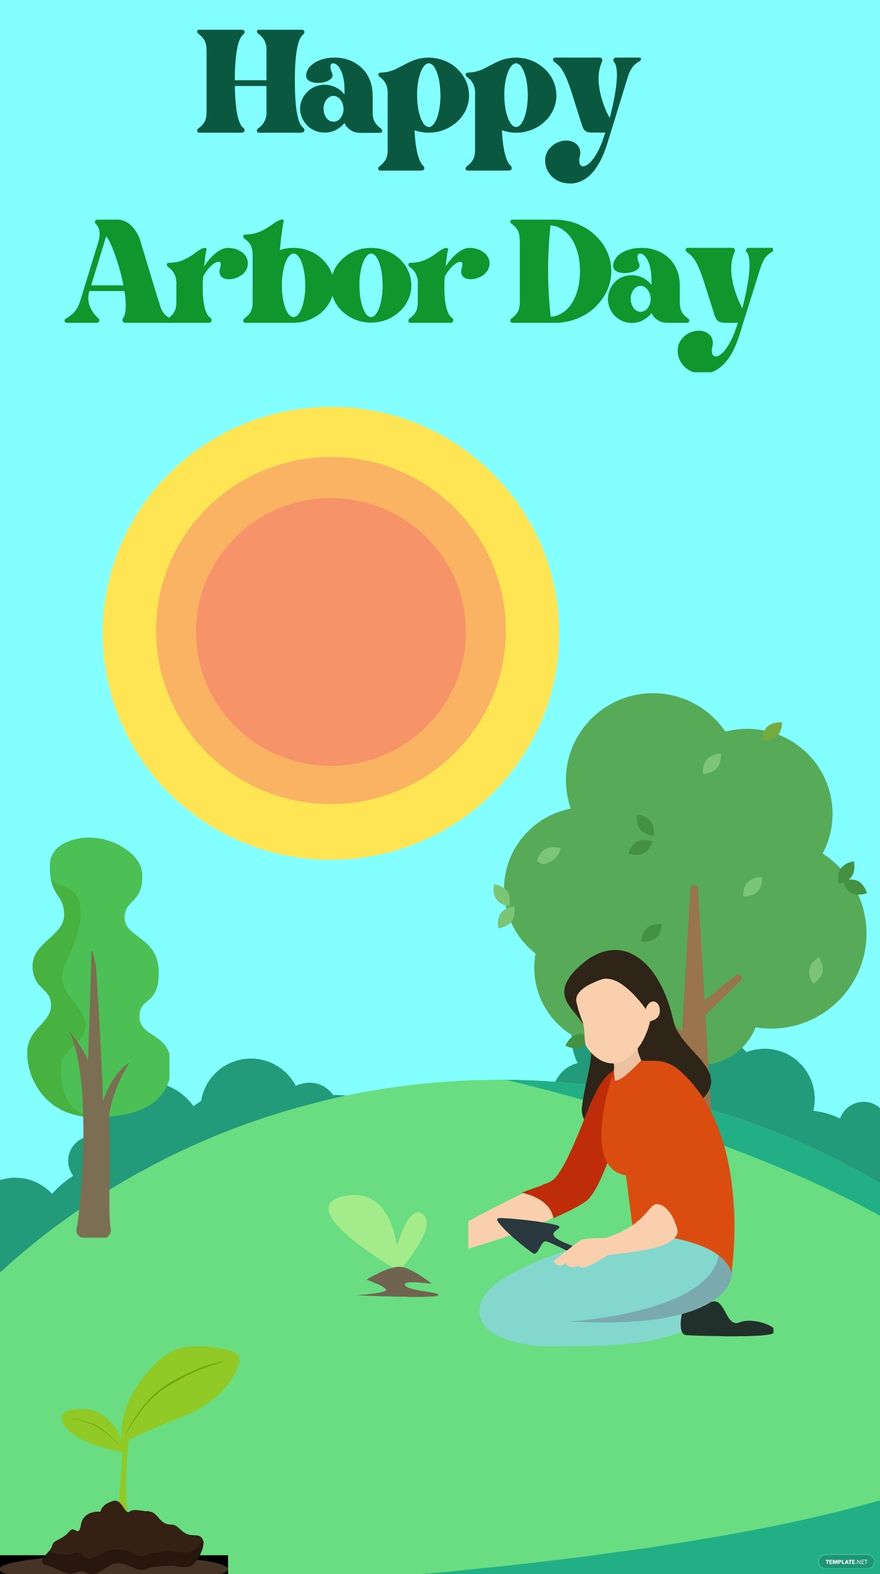 Free Arbor Day iPhone Background in PDF, Illustrator, PSD, EPS, SVG, JPG, PNG